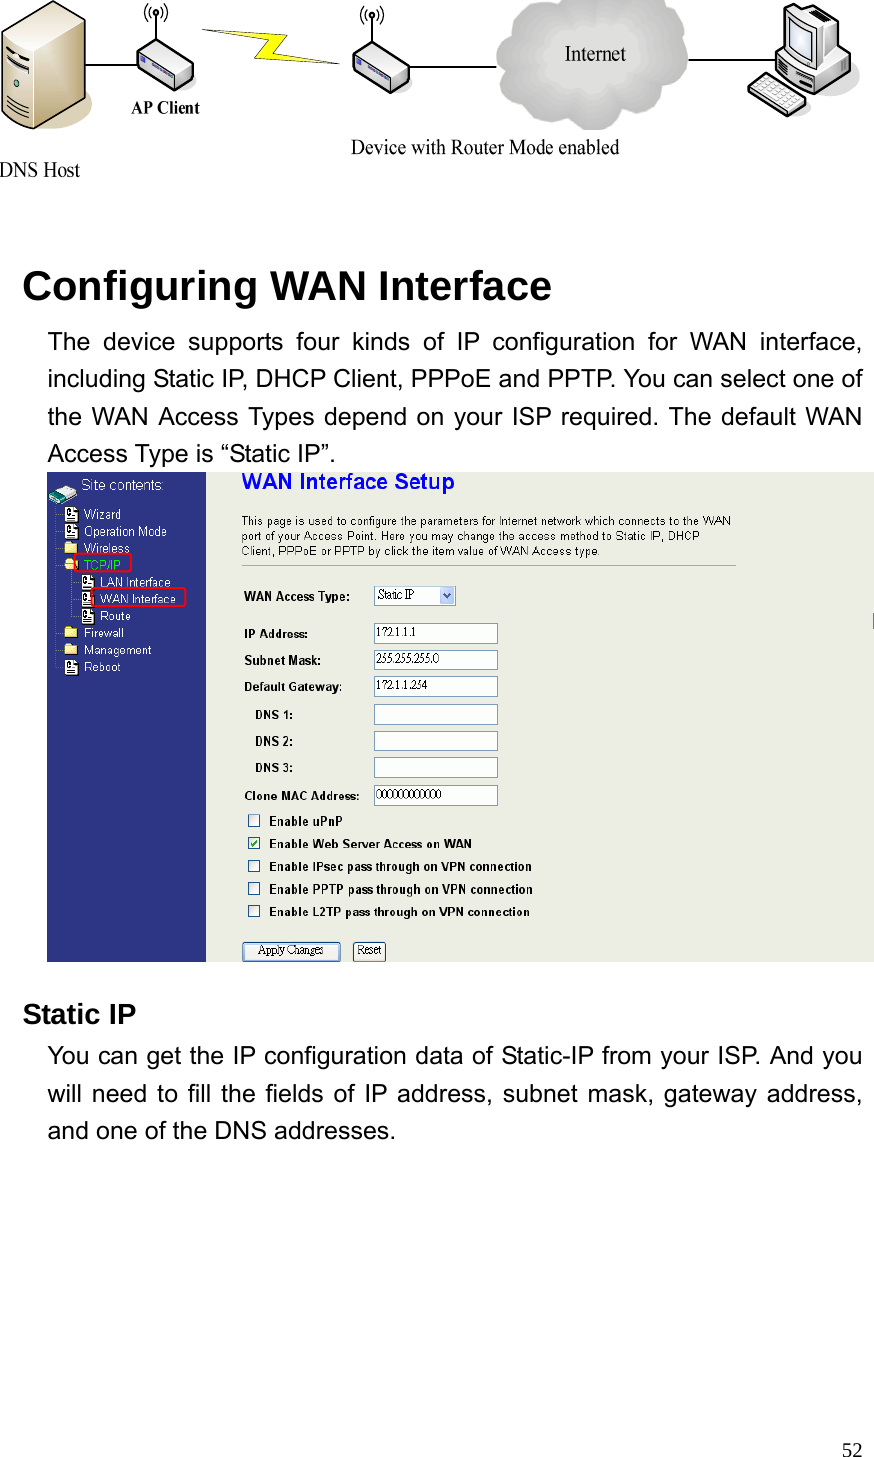  52    Configuring WAN Interface The device supports four kinds of IP configuration for WAN interface, including Static IP, DHCP Client, PPPoE and PPTP. You can select one of the WAN Access Types depend on your ISP required. The default WAN Access Type is “Static IP”.     Static IP You can get the IP configuration data of Static-IP from your ISP. And you will need to fill the fields of IP address, subnet mask, gateway address, and one of the DNS addresses. 